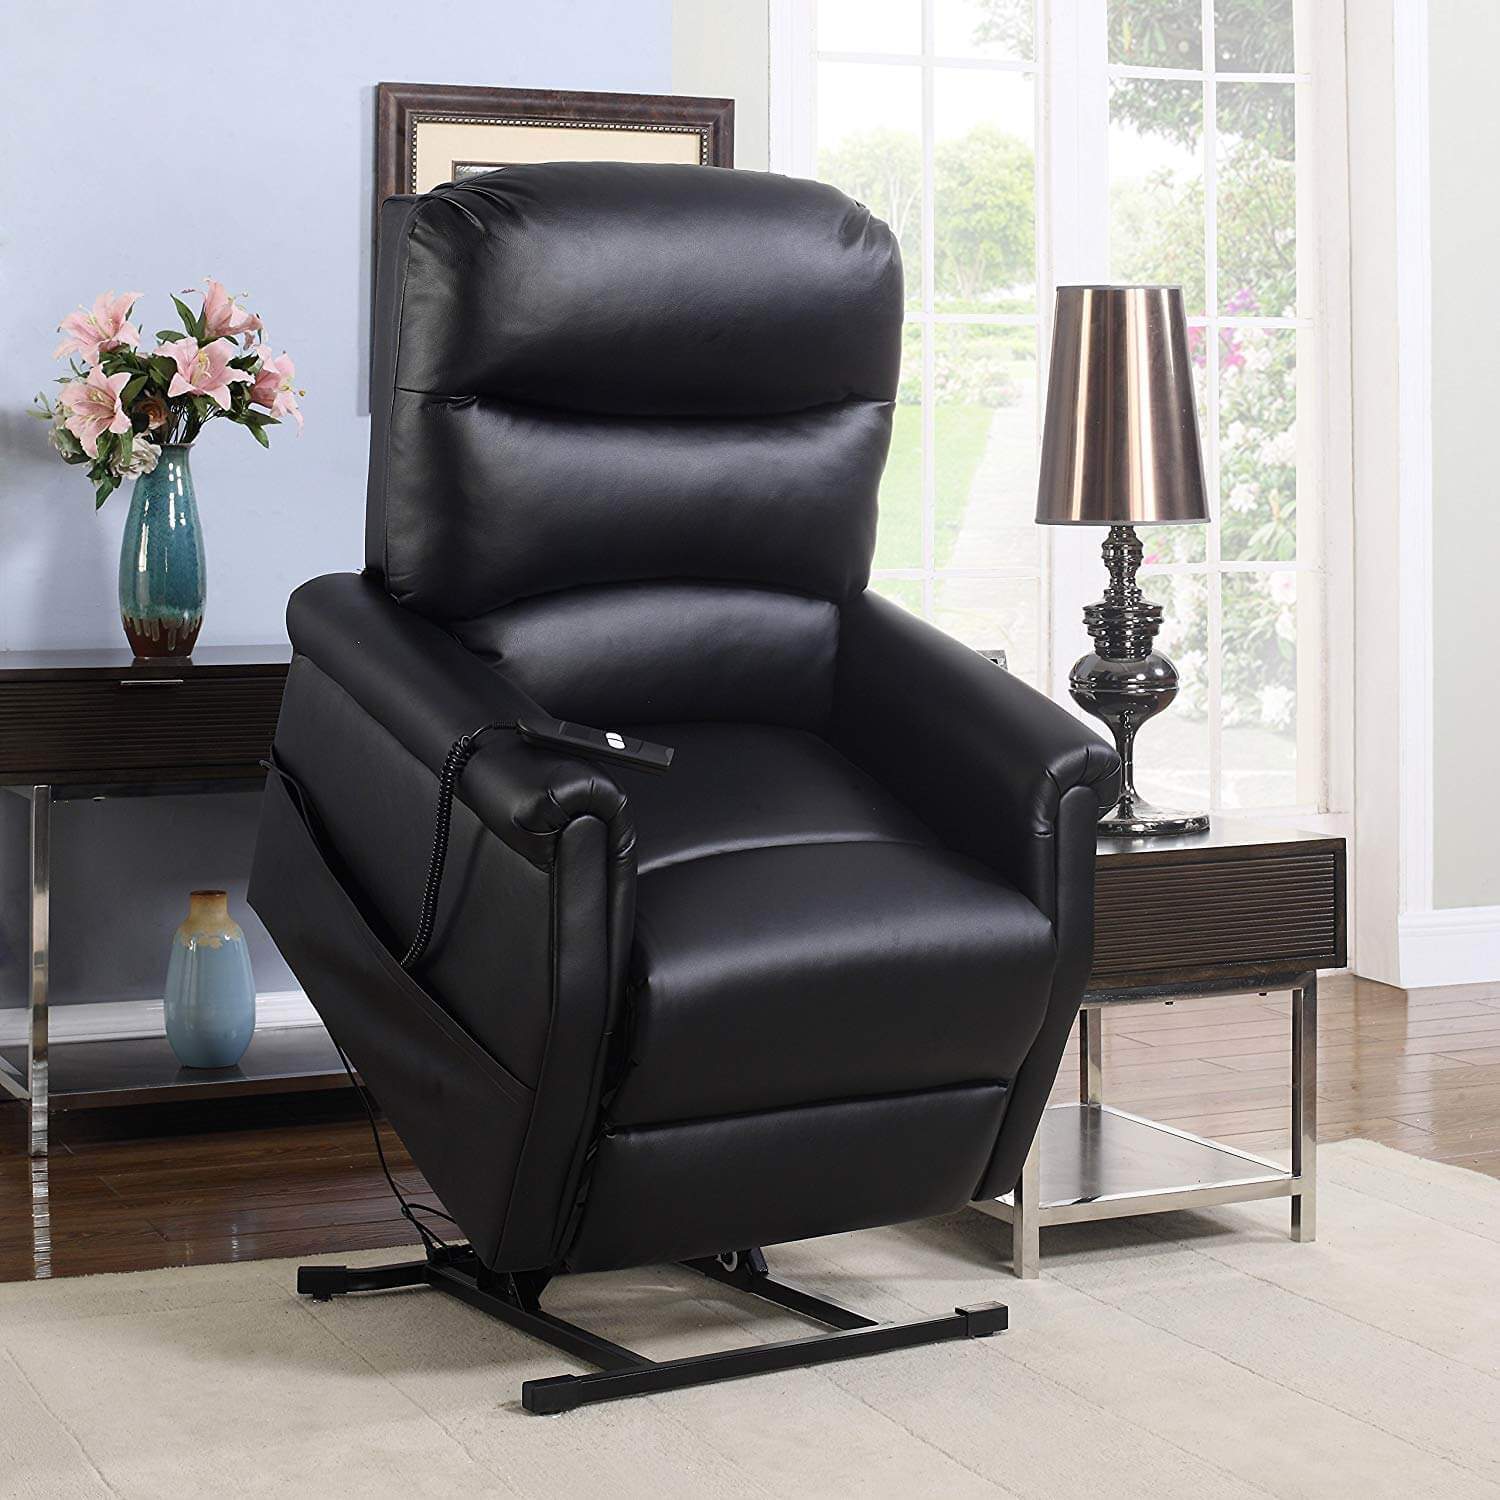 Madison Home Classic Plush Bonded Leather Power Lift Recliner